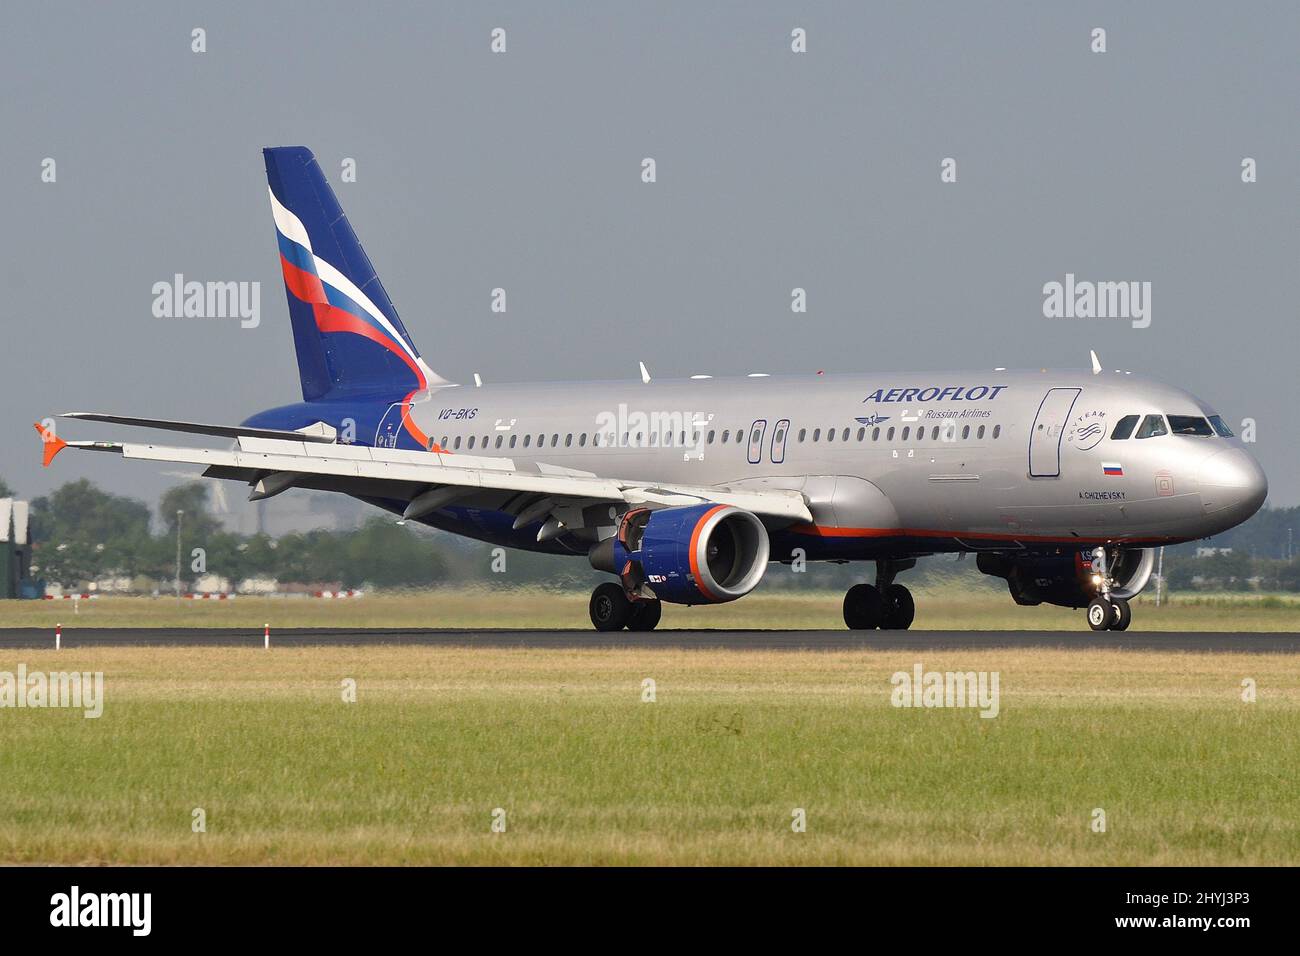 AEROFLOT AIRBUS A320 HAS BERMUDAN REGISTRATION CANCELLED DUE TO RUSSIAN INVASION OF UKRAINE IN 2022. Stock Photo